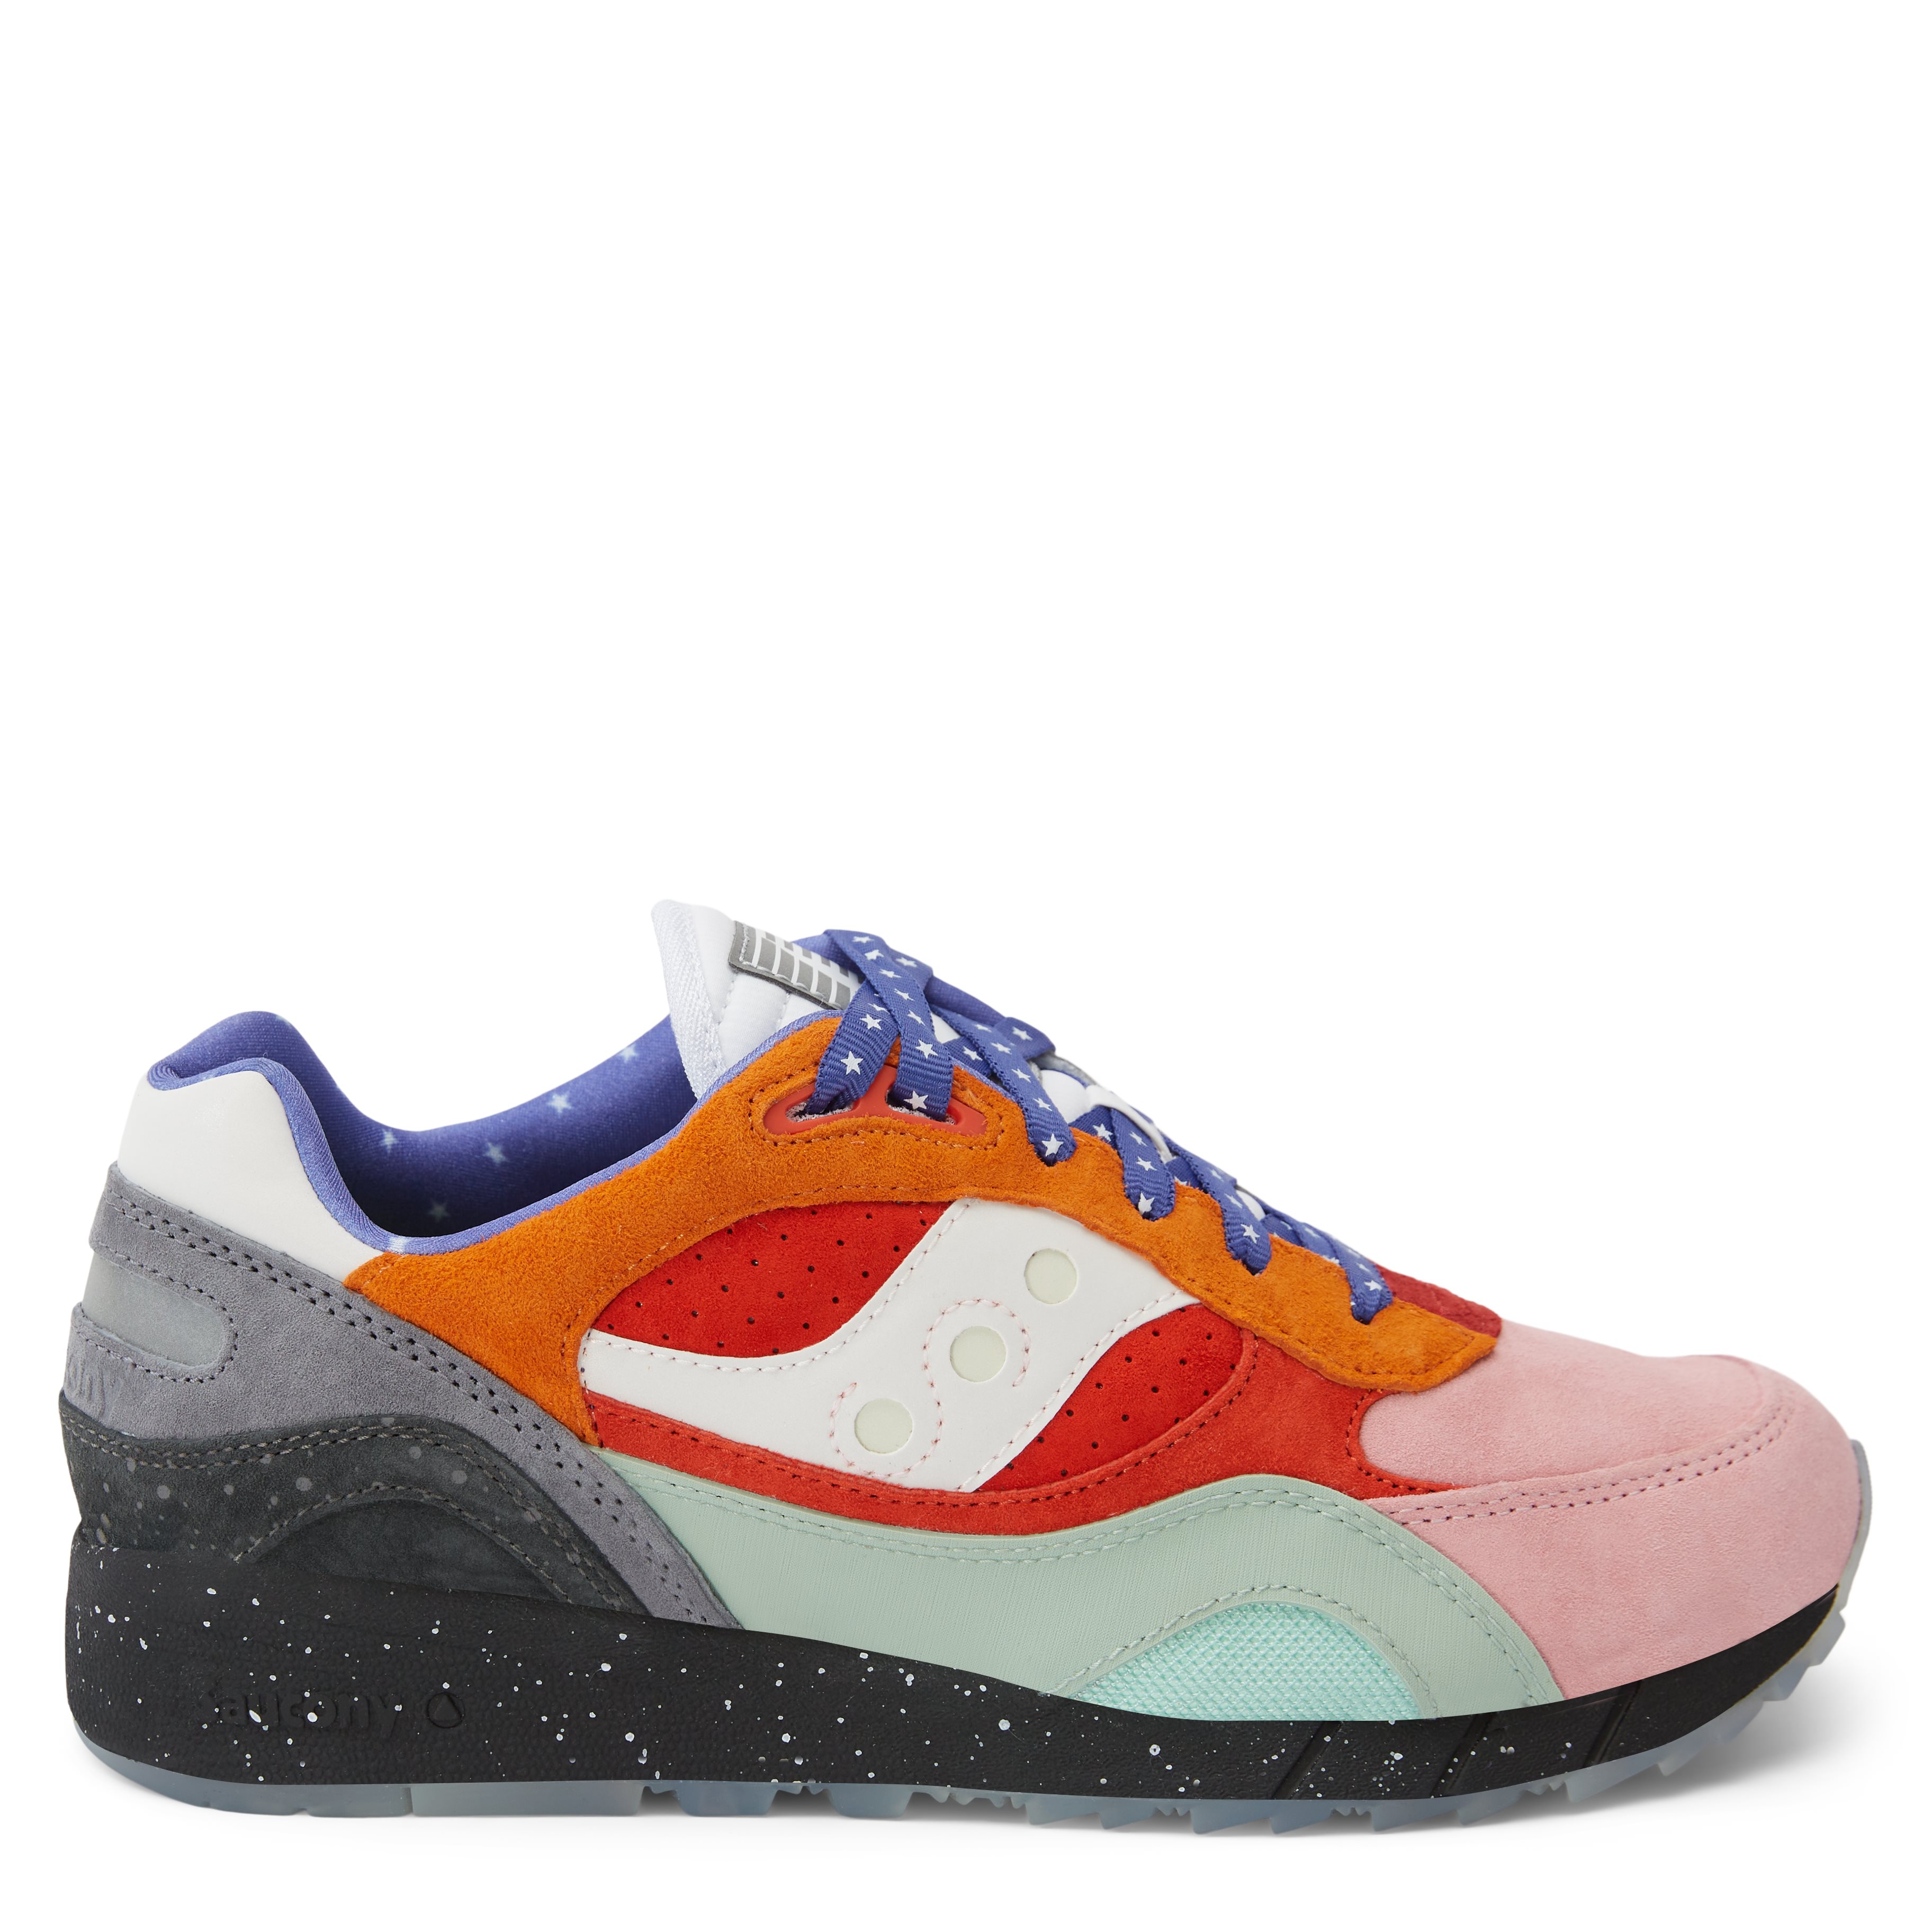 Saucony Shoes SHADOW 6000 S70703-1 Multi